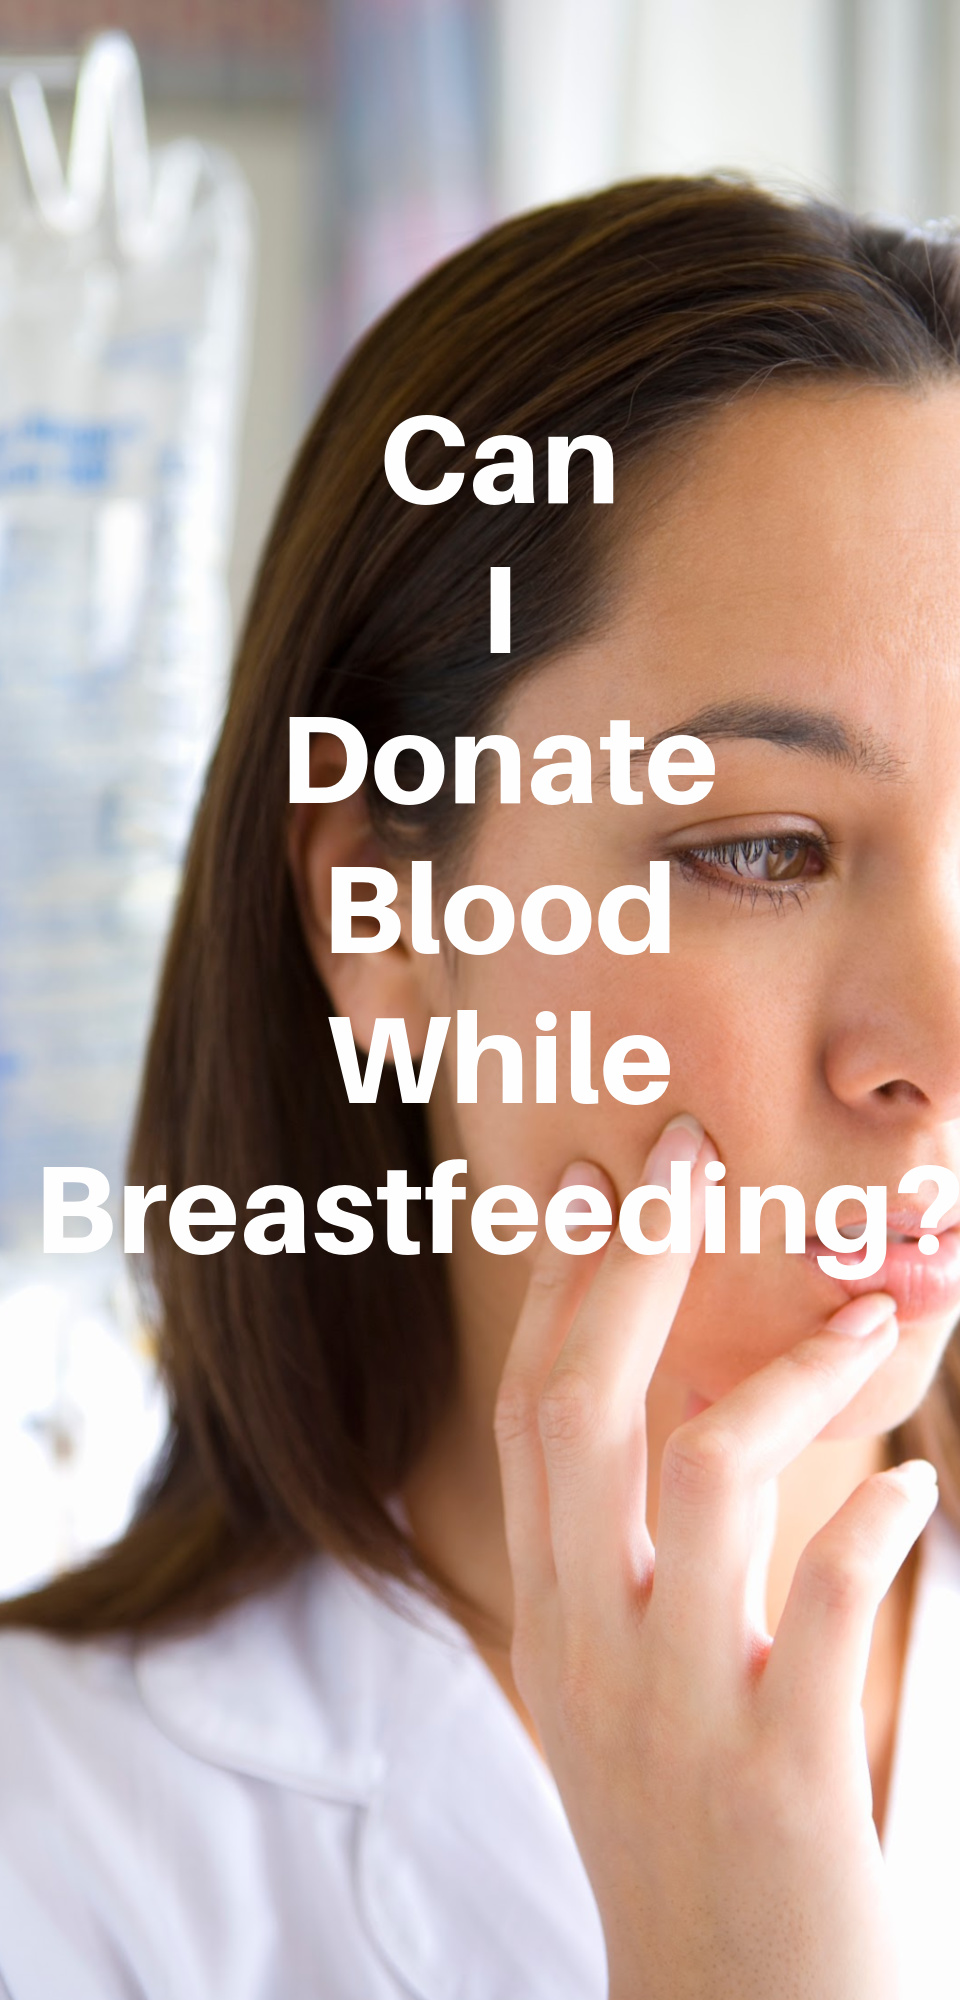 Can You Donate Blood While You Are Breastfeeding?